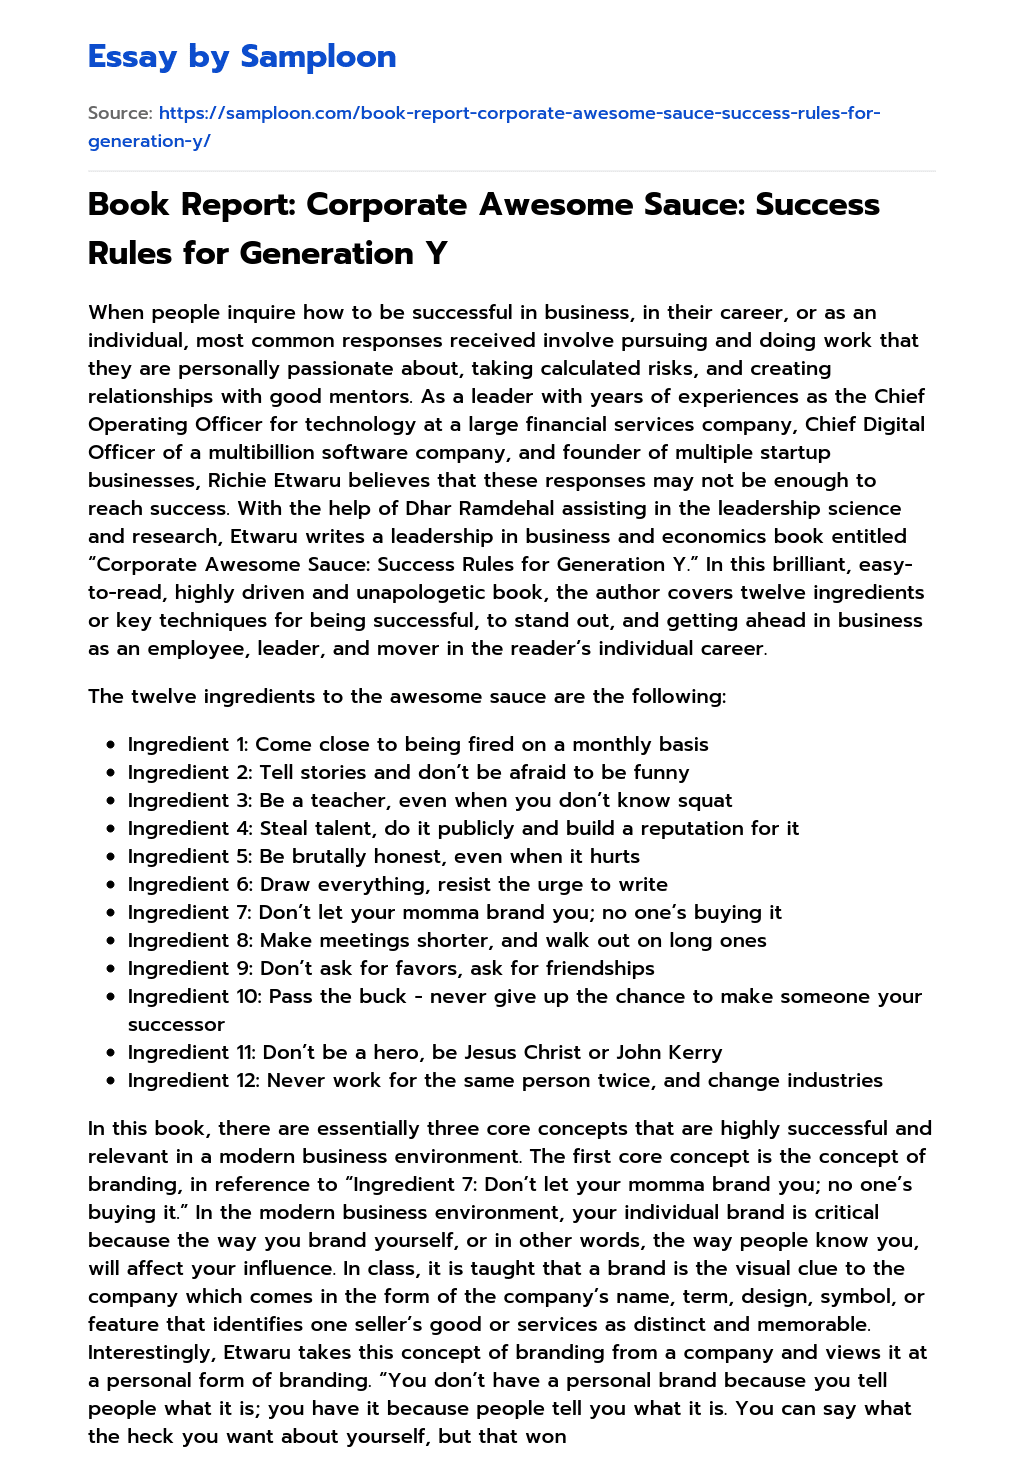 Book Report: Corporate Awesome Sauce: Success Rules for Generation Y essay